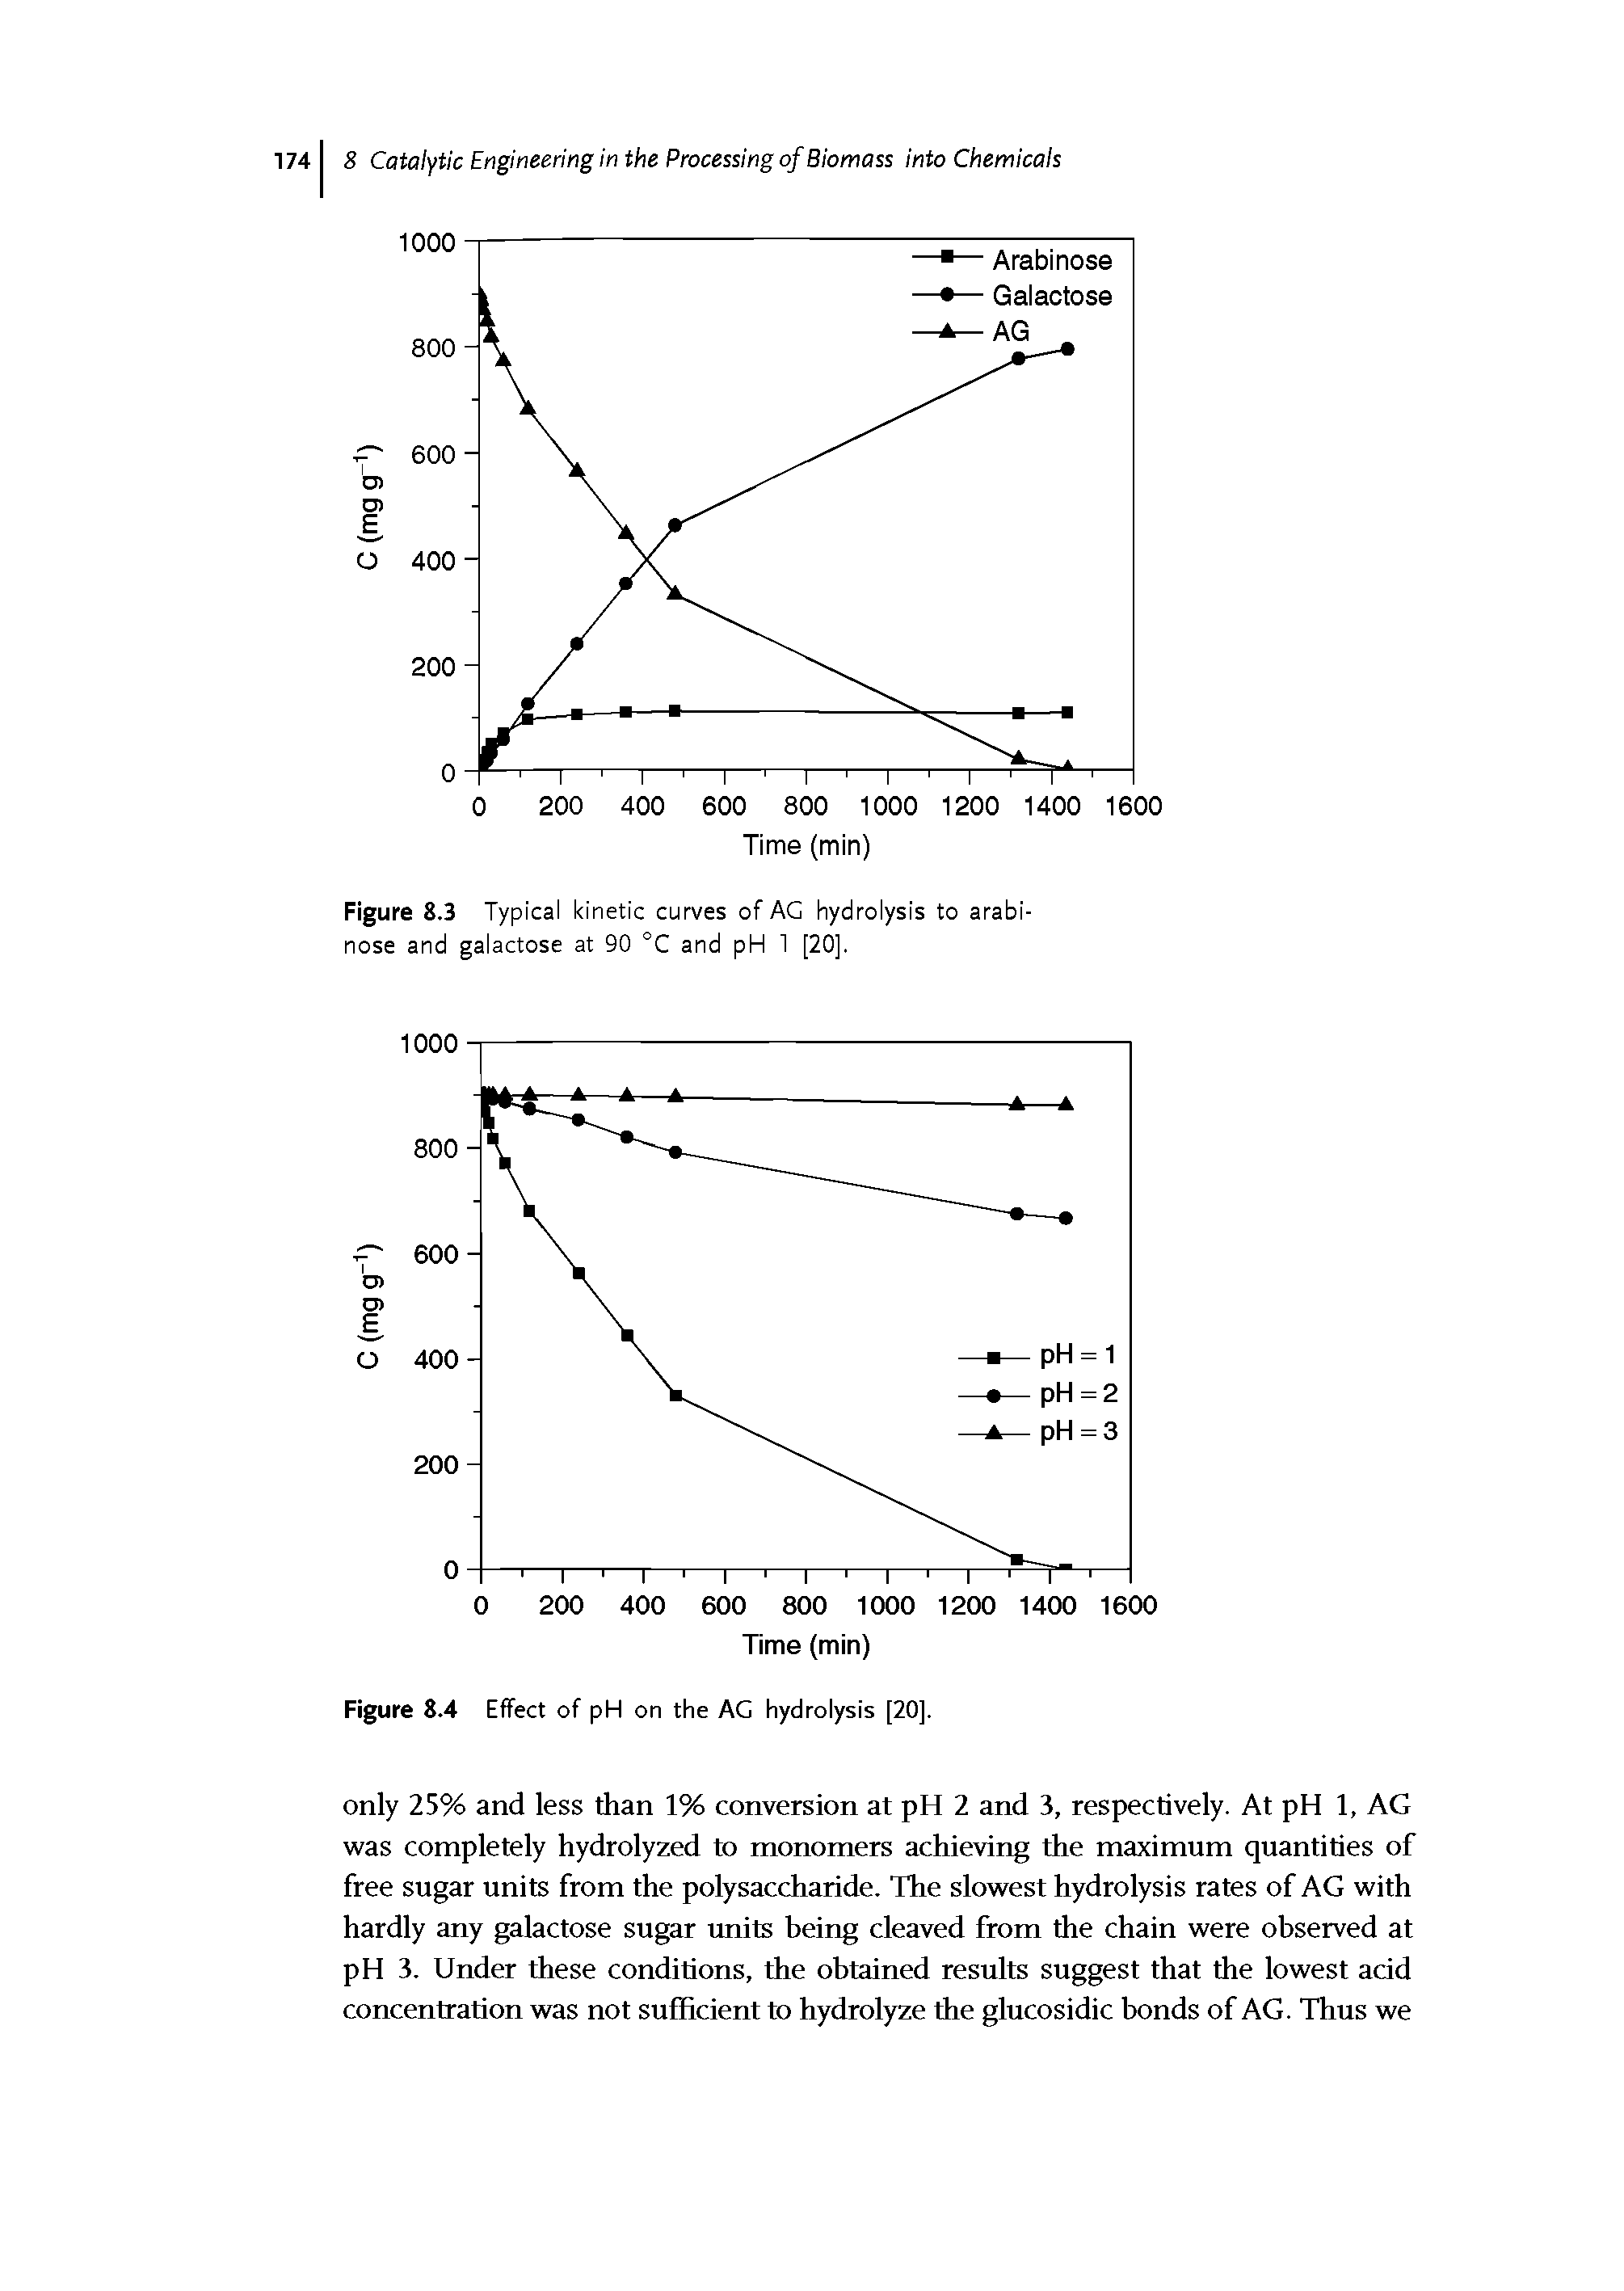 Figure 8.3 Typical kinetic curves of AG hydrolysis to arabi-nose and galactose at 90 °C and pH 1 [20].